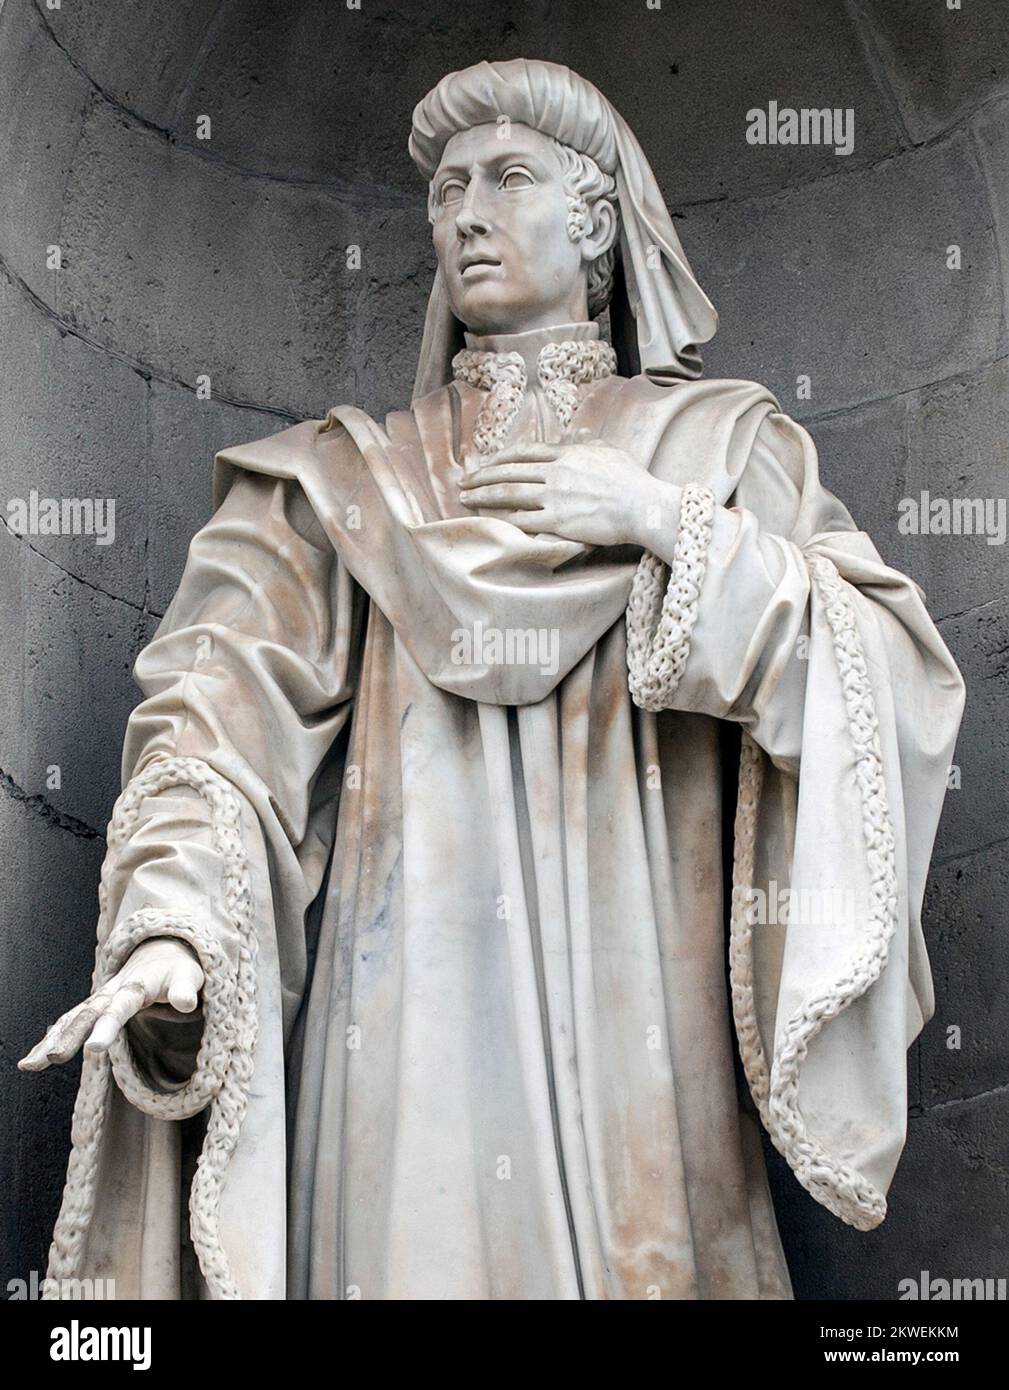 Barcelona, Spain - Dec 29th 2019: Counselor of Council of One Hundred men or Consell de Cent, Barcelona, Spain. Exterior statue at Barcelona City Hall Stock Photo